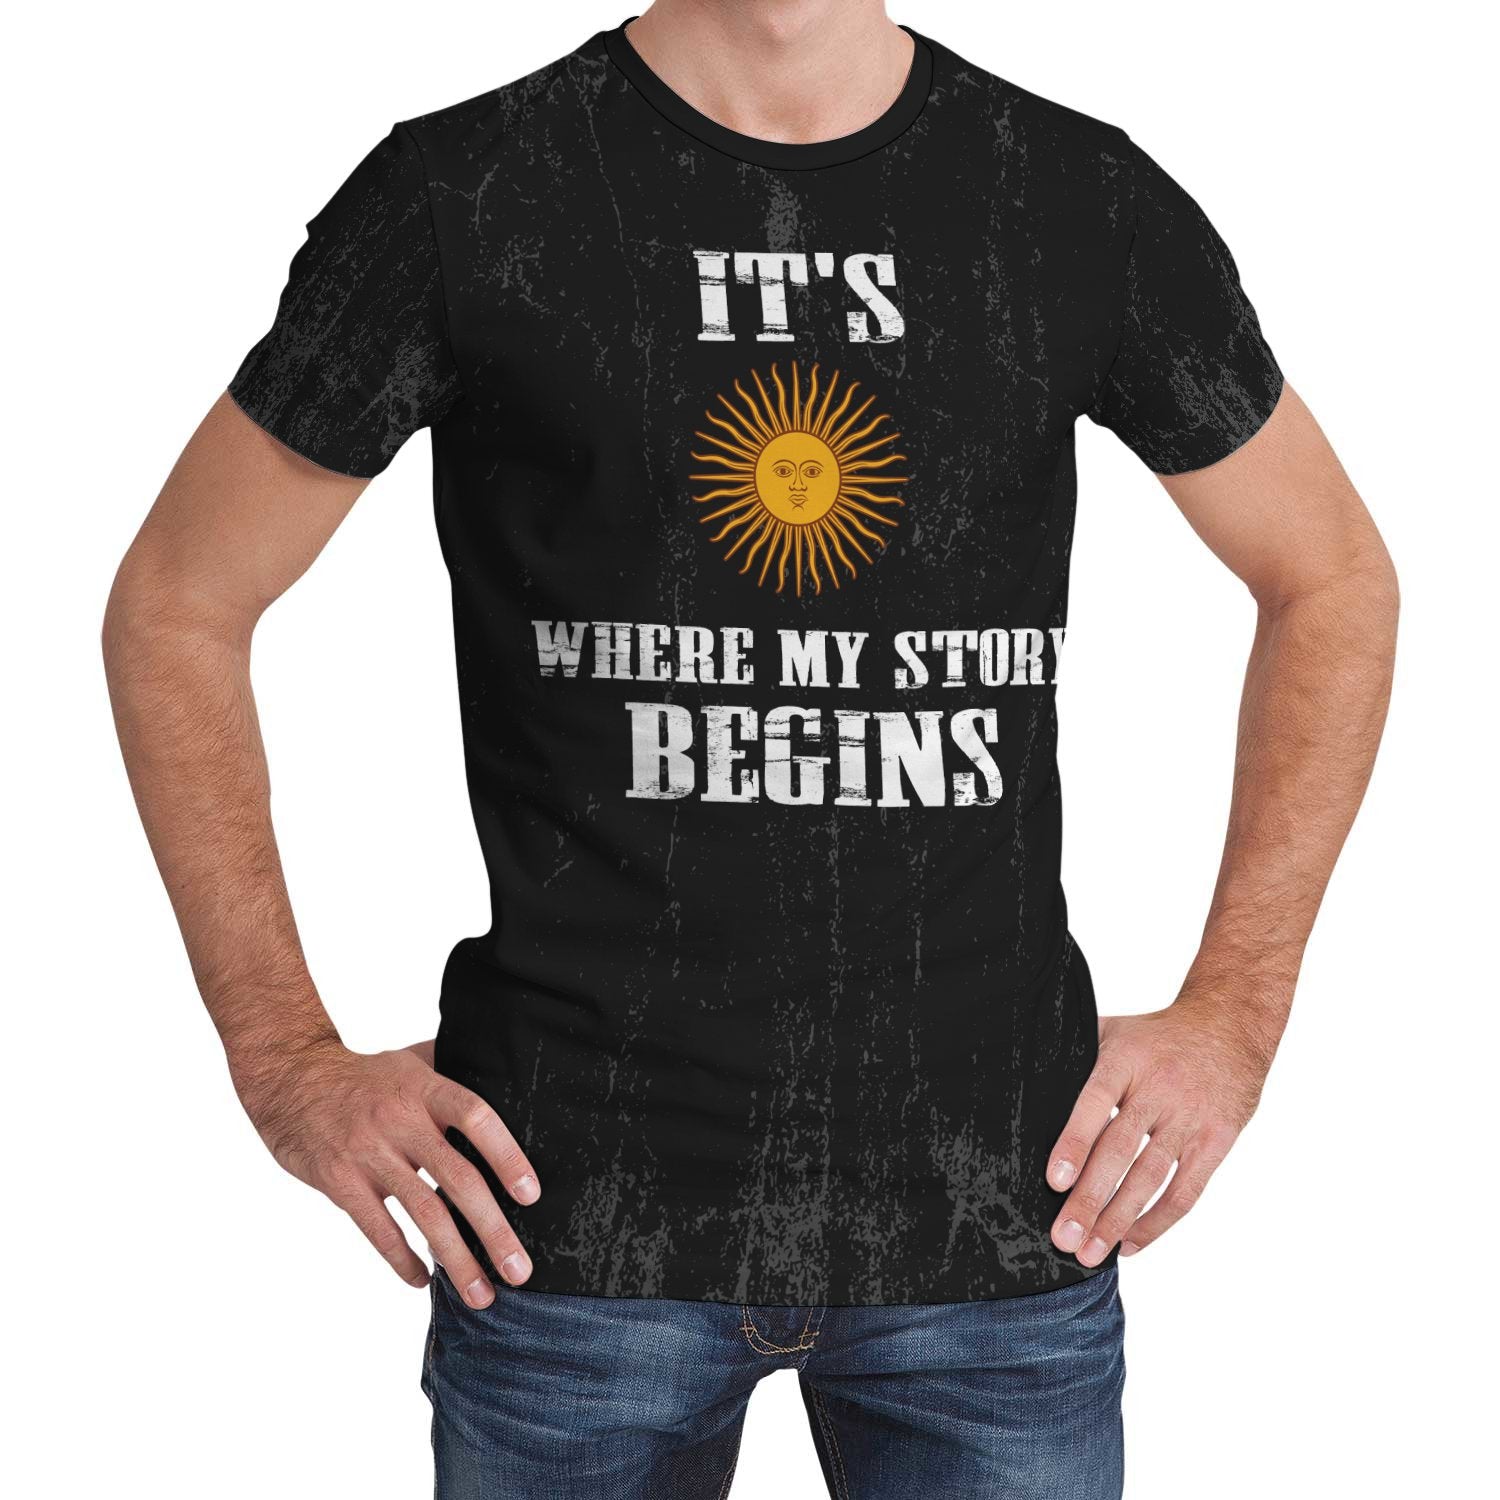 argentina-t-shirt-its-where-my-story-begins